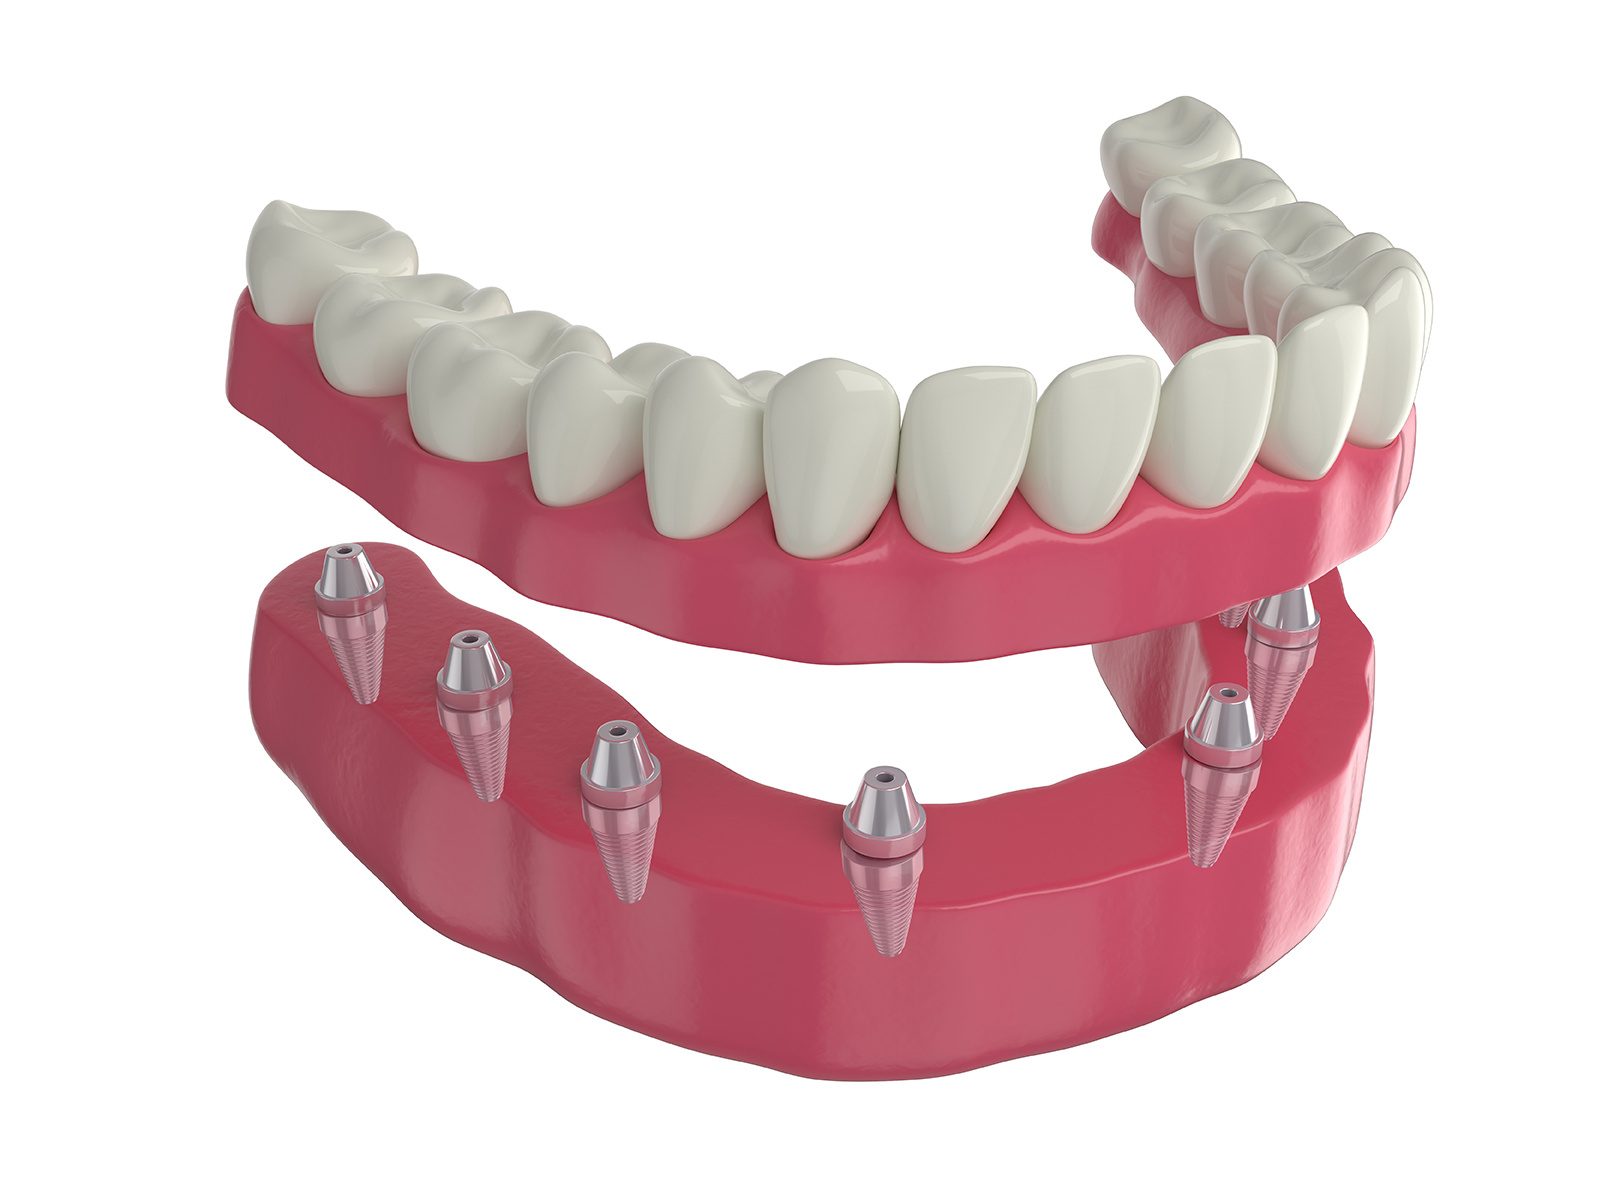 What Are The Problems With Implant Retained Dentures?